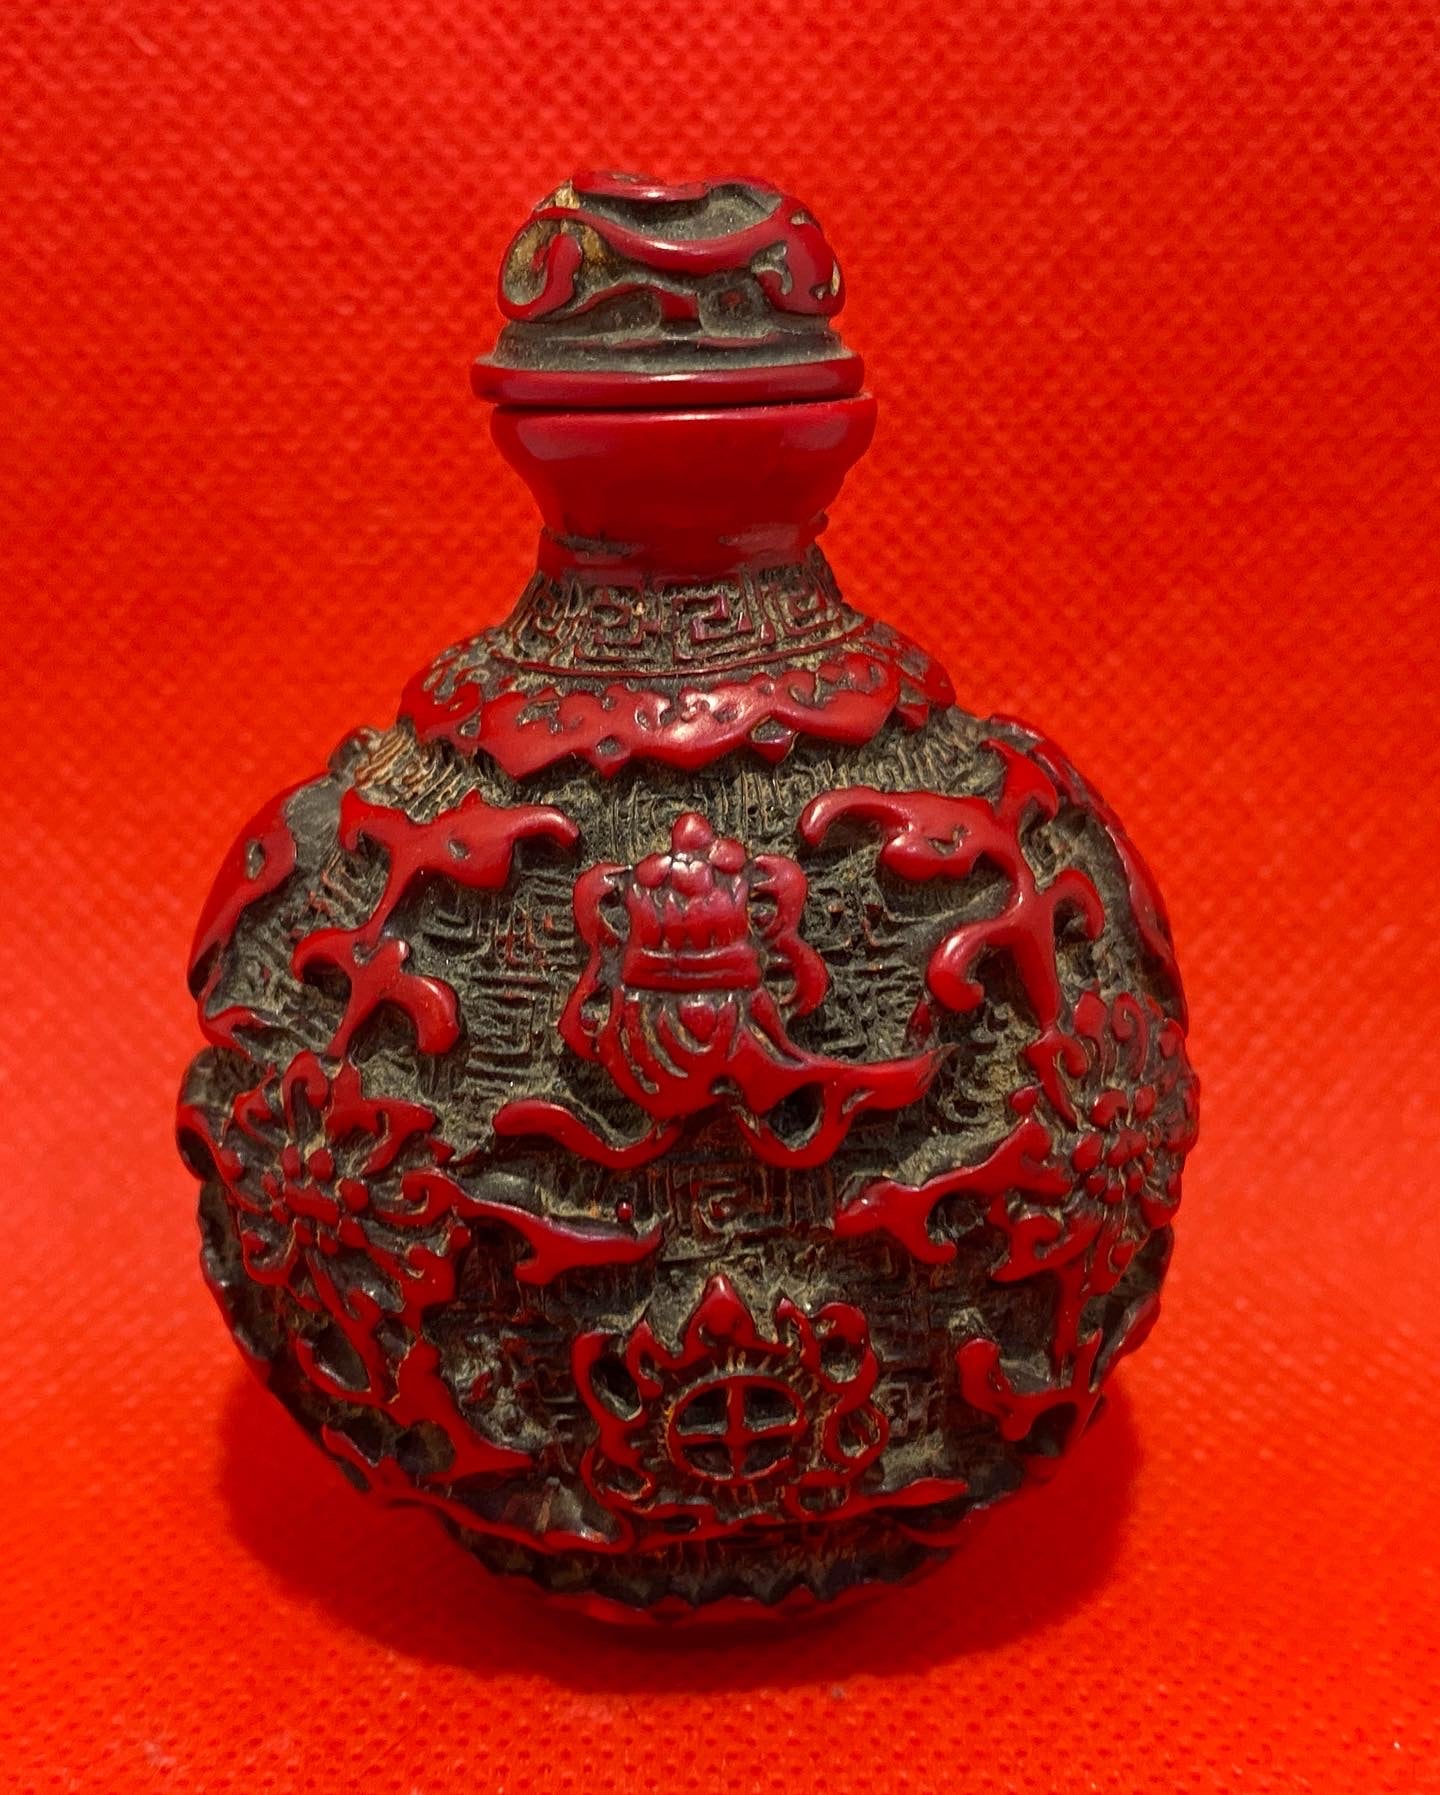 Antique Chinese Cinnabar lacquer snuff bottle, carved with Buddha Symbols. Original stopper. Early 20th century.